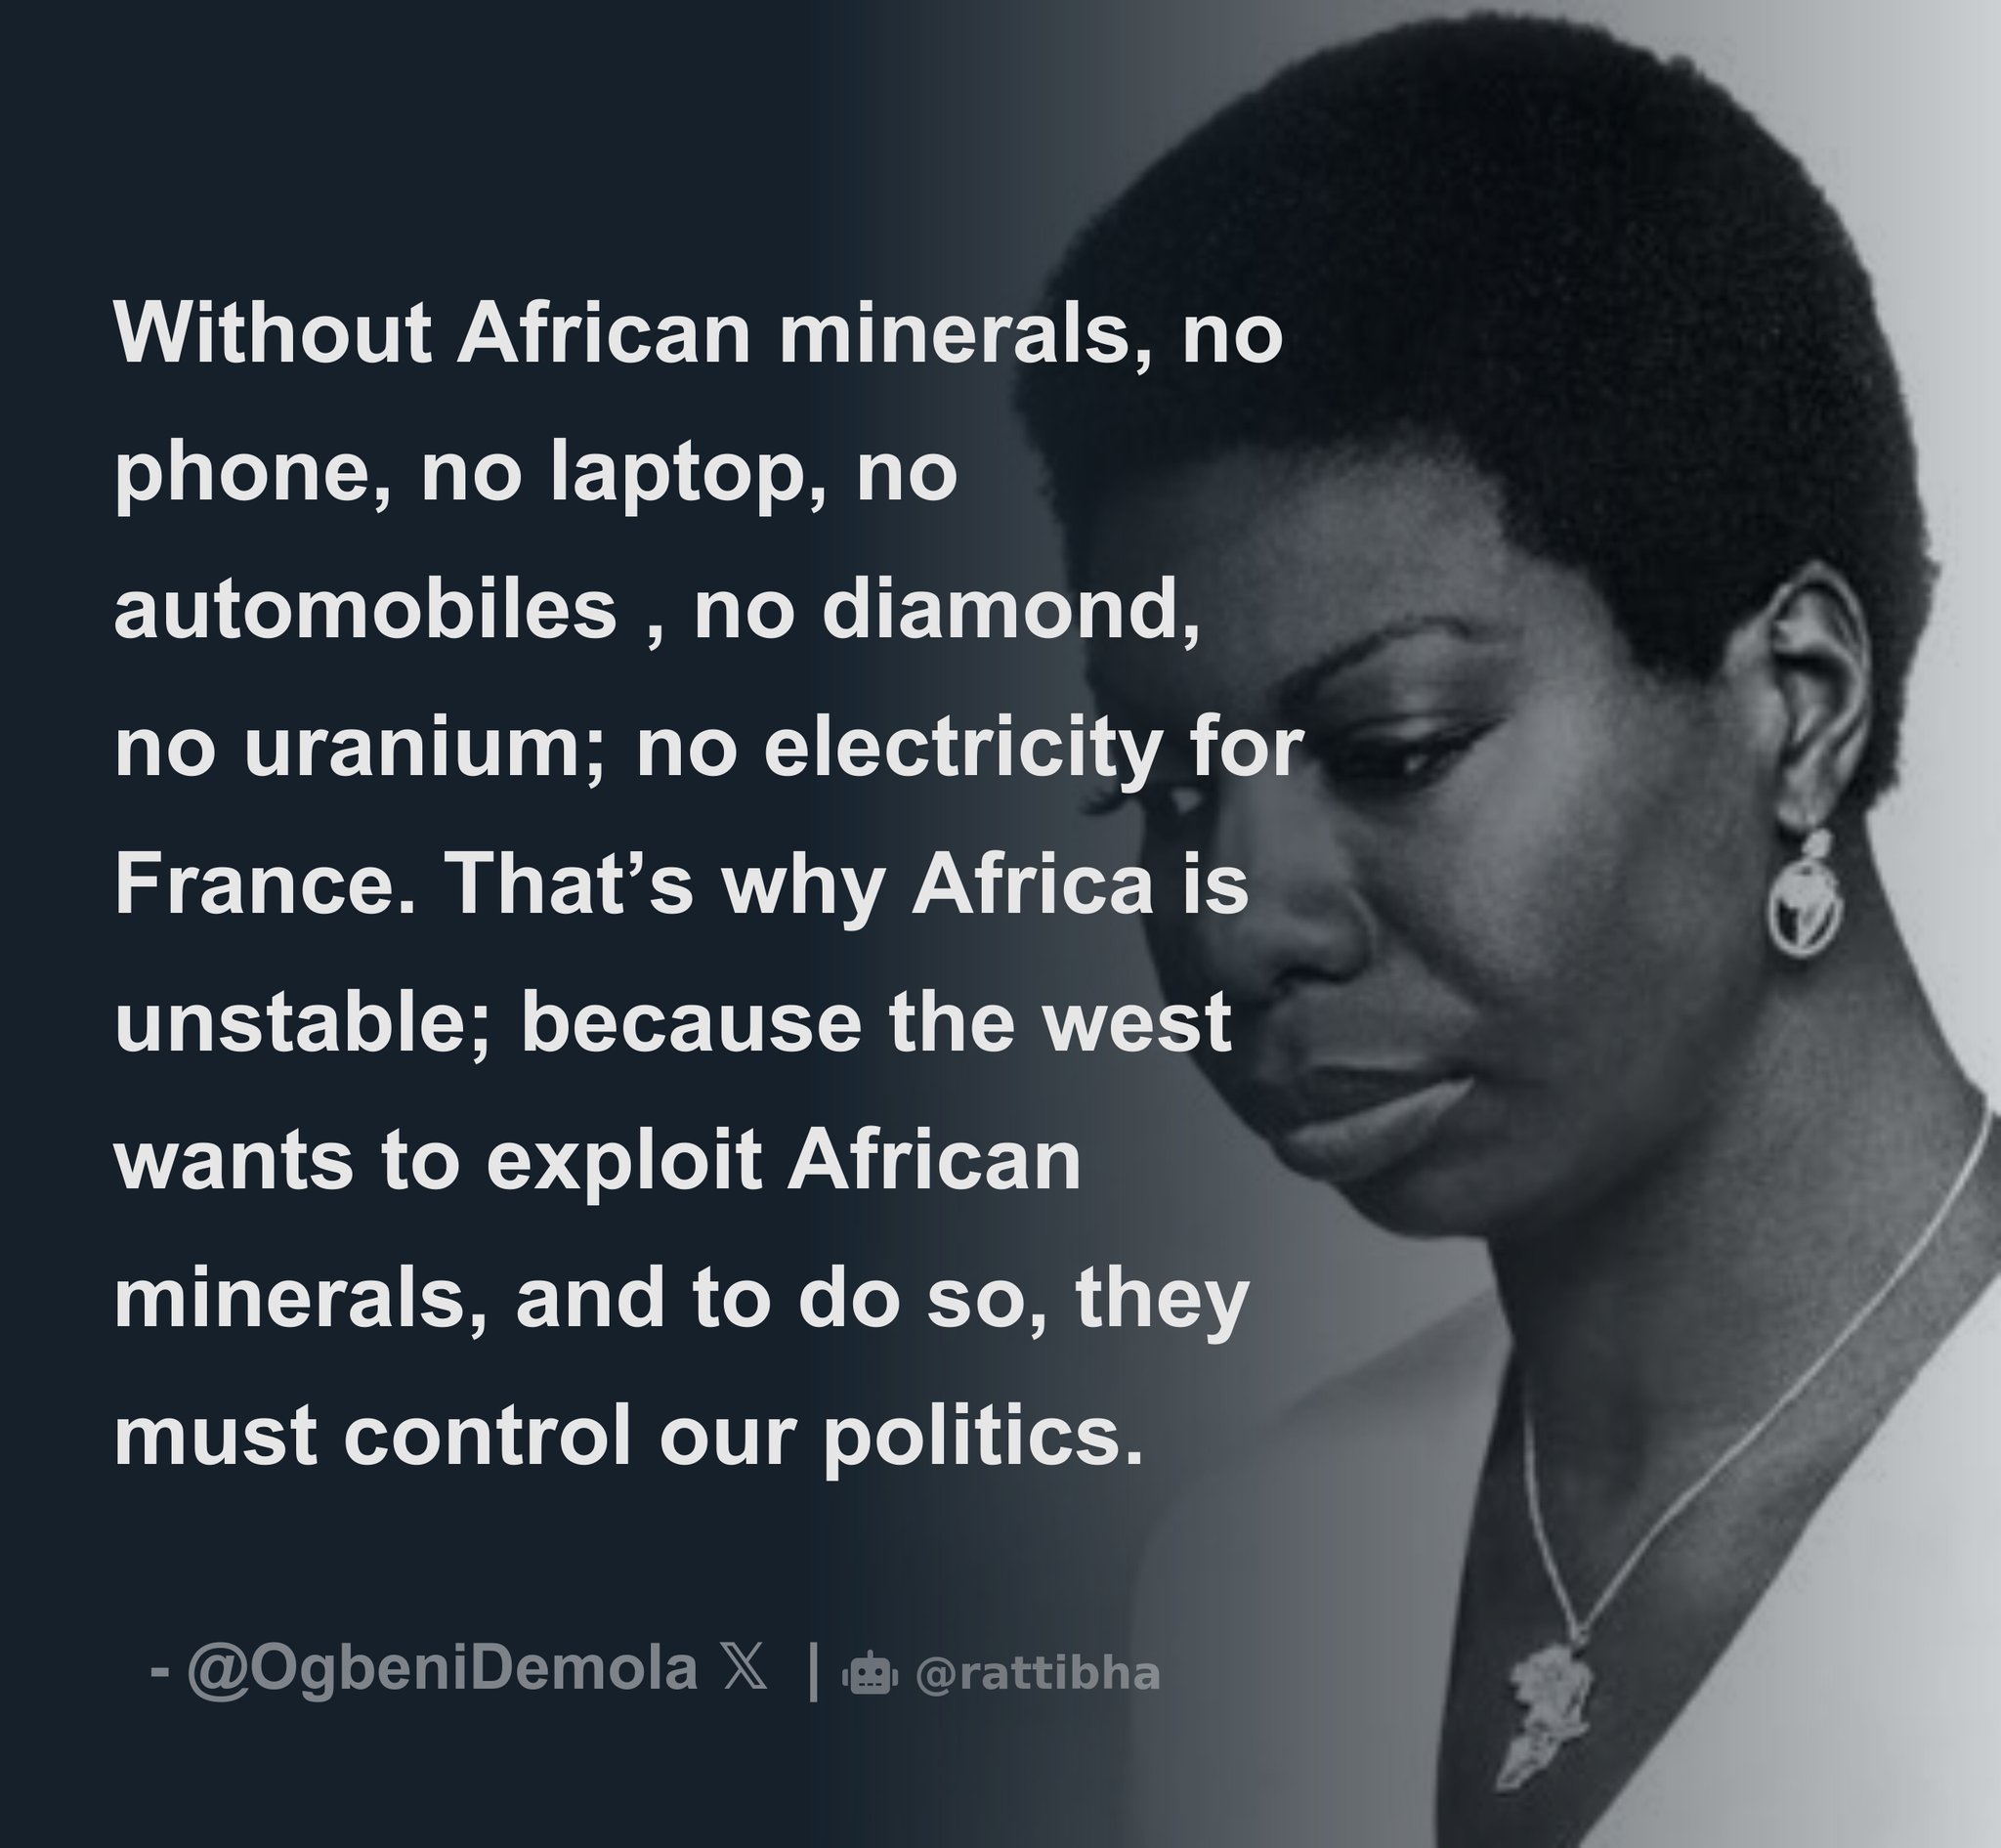 Without African minerals, no phone, no laptop, no
automobiles, no diamond, no uranium; no electricity for France. That's why Africa is unstable; because the west wants to exploit African minerals, and to do so, they must control our politics. ~ 
Nina Simone